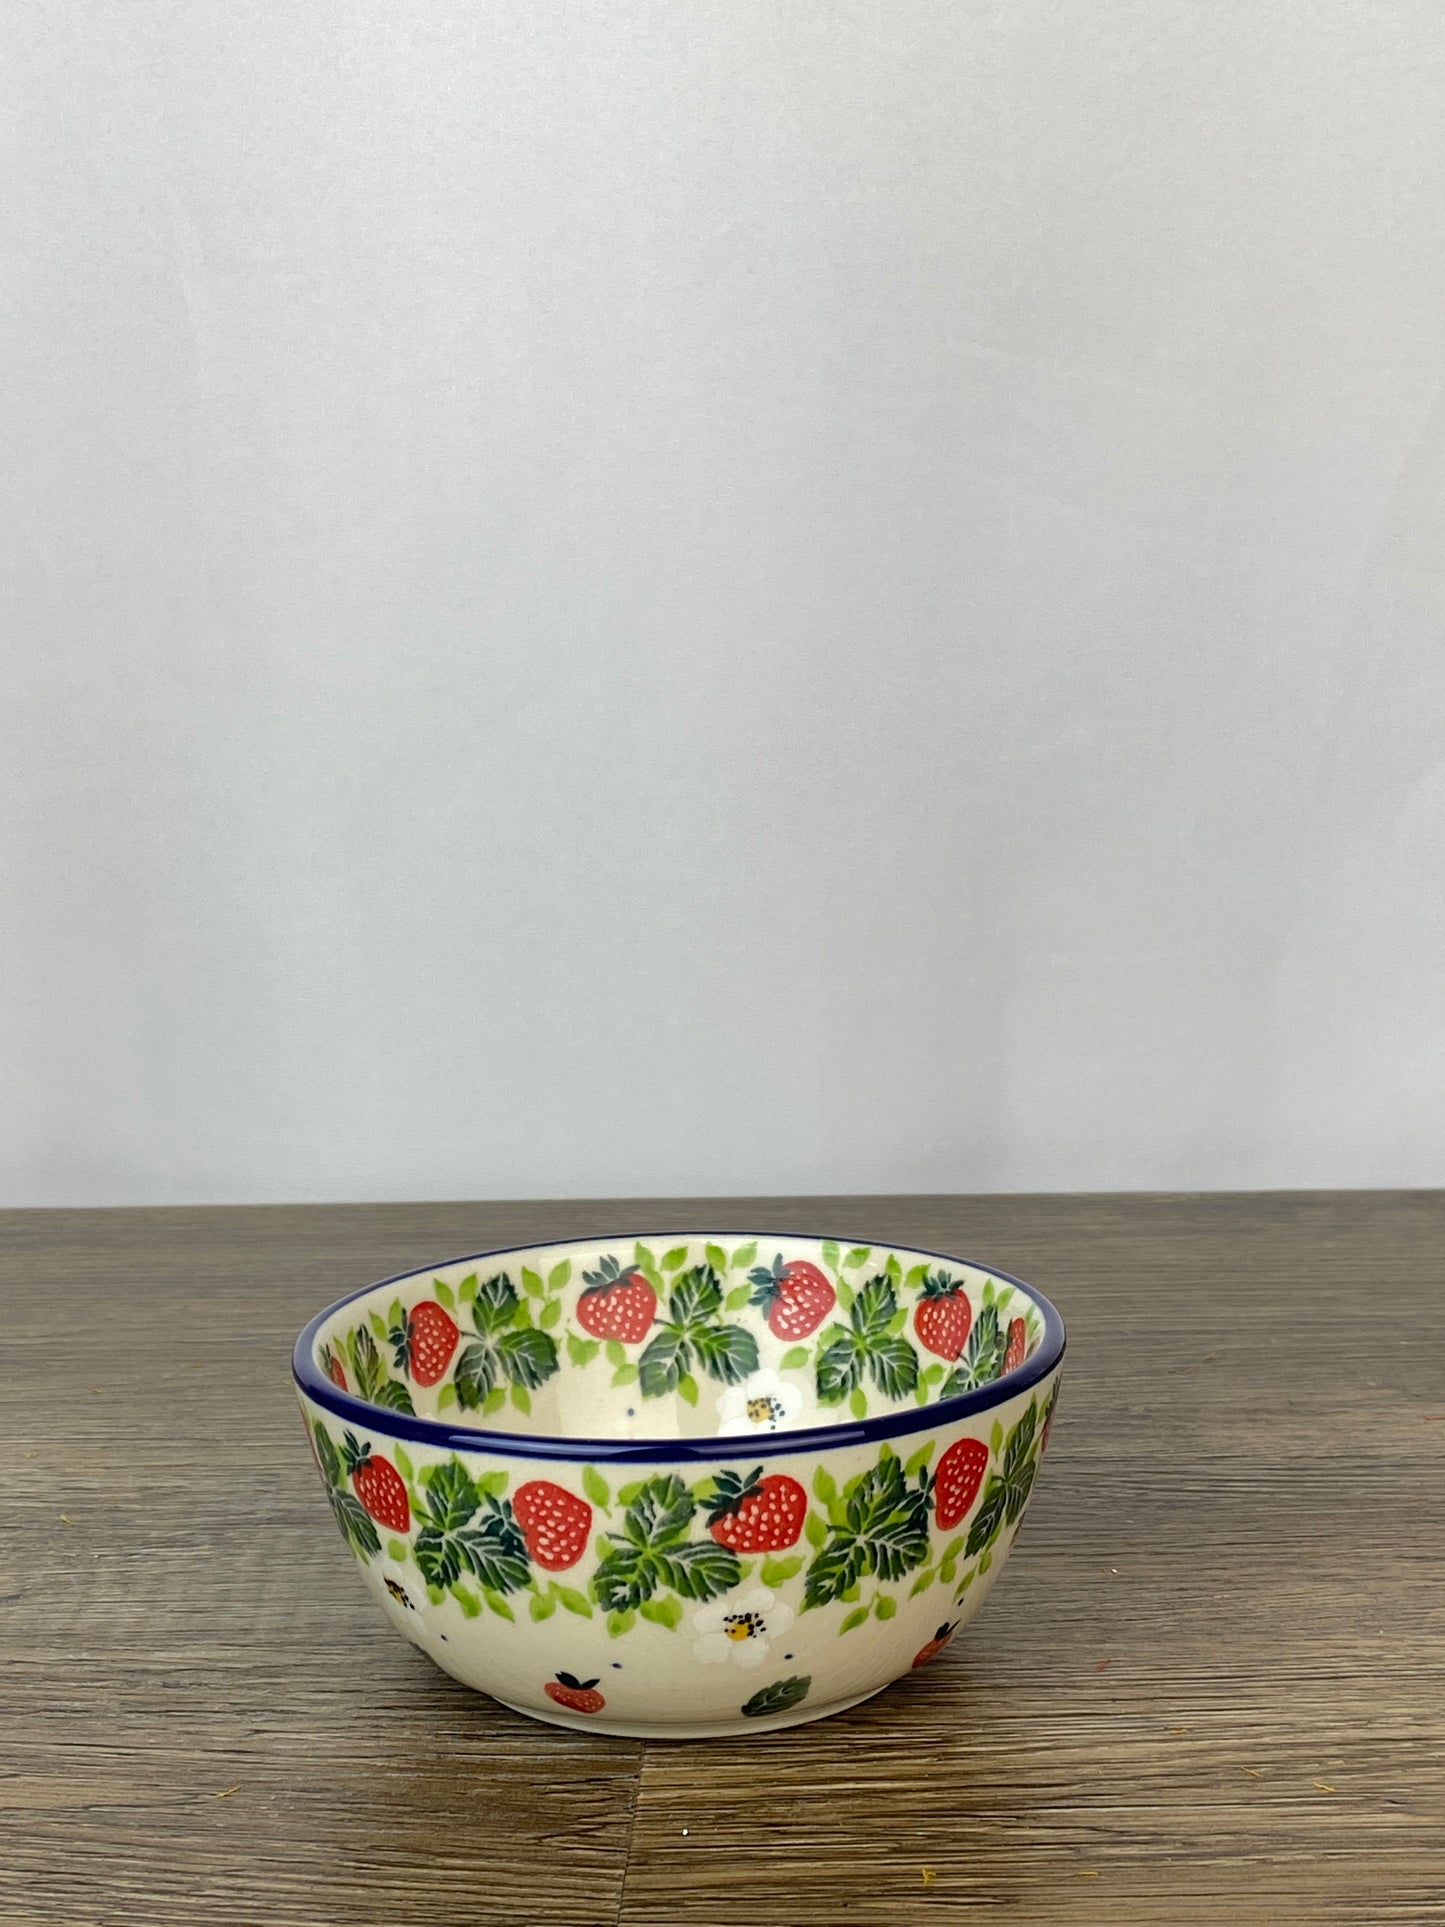 Small Cereal / Dessert Bowl - Shape 17 - Pattern 2709